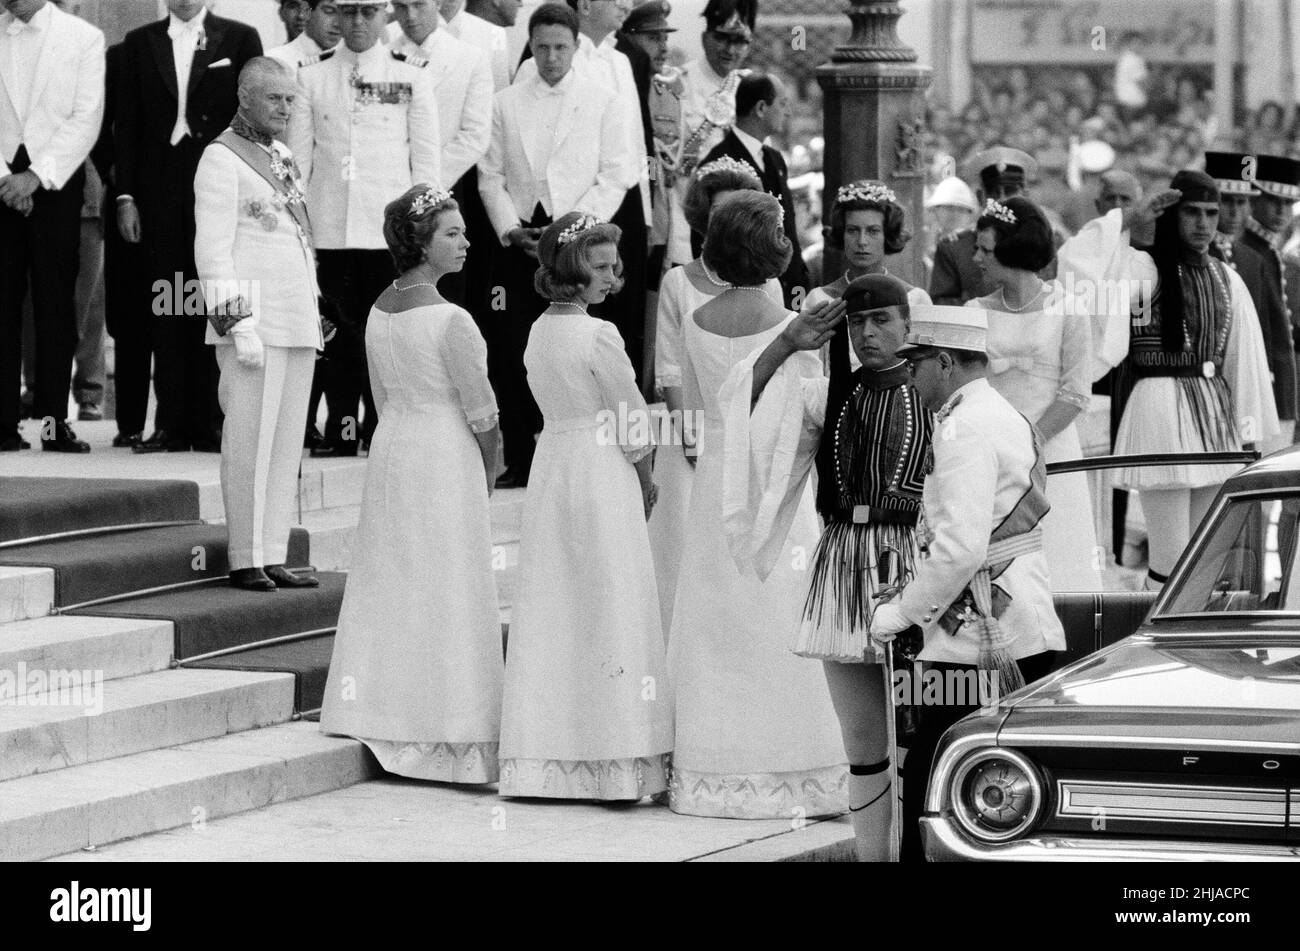 The wedding of King Constantine II of Greece to Princess Anne-Marie of Denmark. Athens, Greece. 18th September 1964. Stock Photo